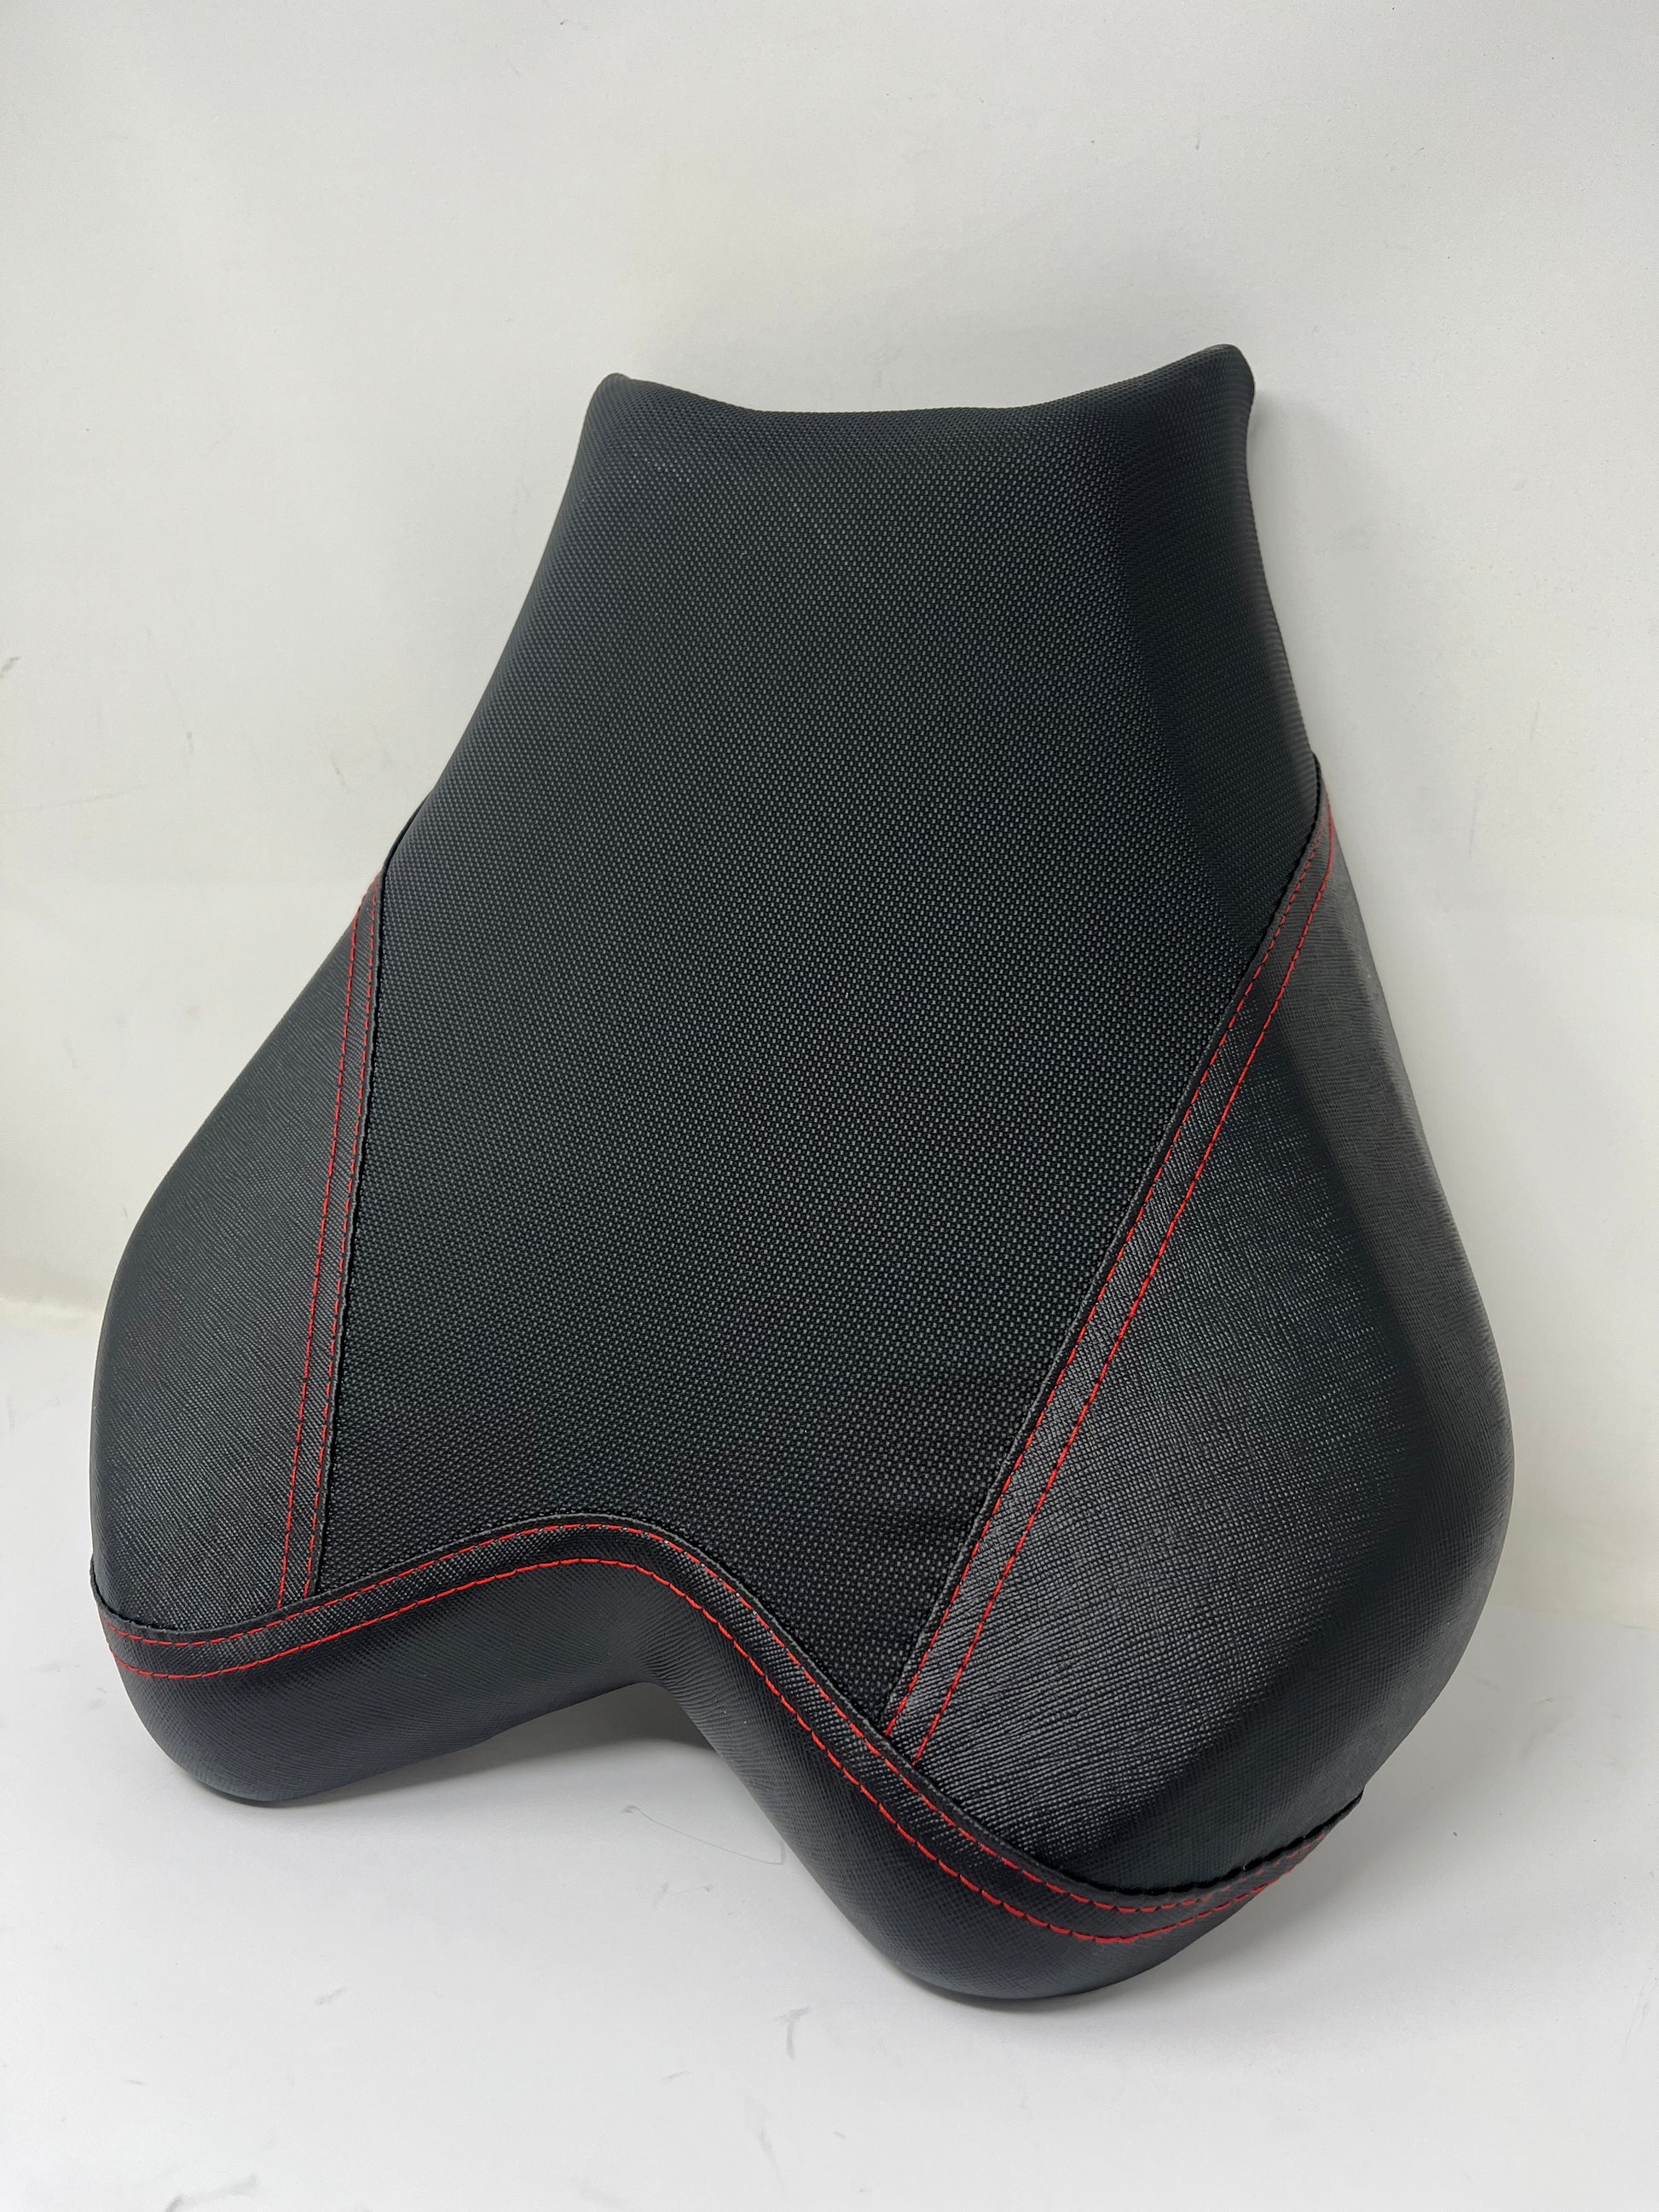 X22R seat for sale seat cushion. DF250RTS motorcycle seat for sale. 